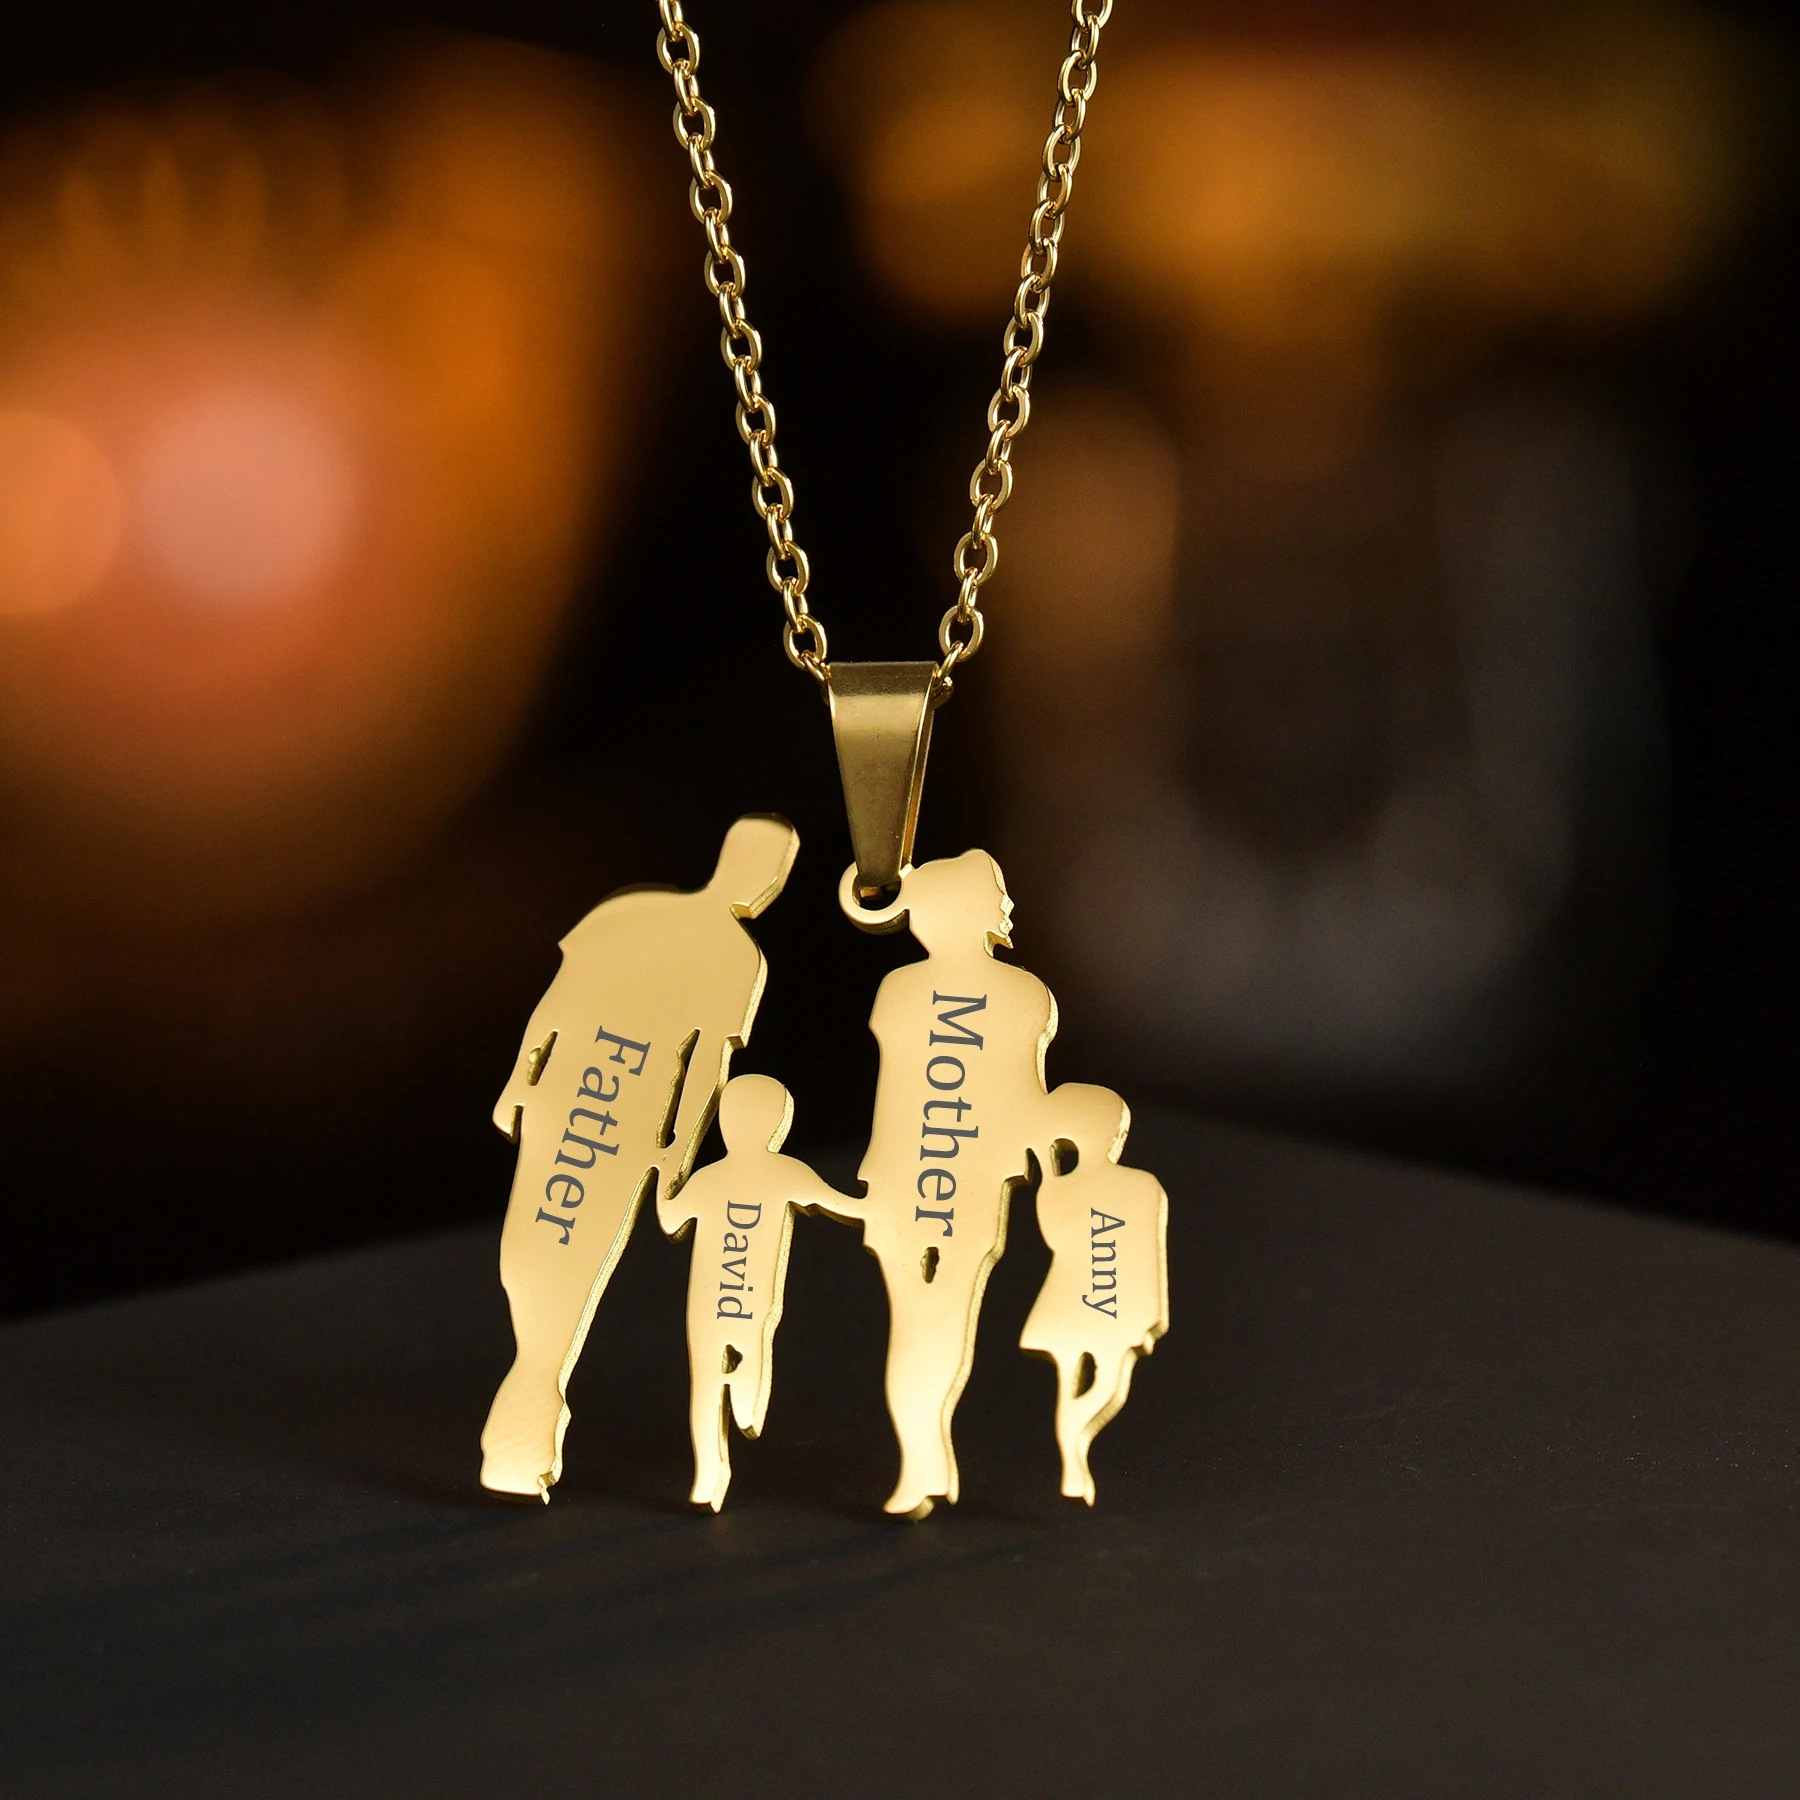 

Trendy Customized Engraving Name Necklace Stainless Steel Jewelry Adornment for Women Personalized Pendant Family Christmas Gift